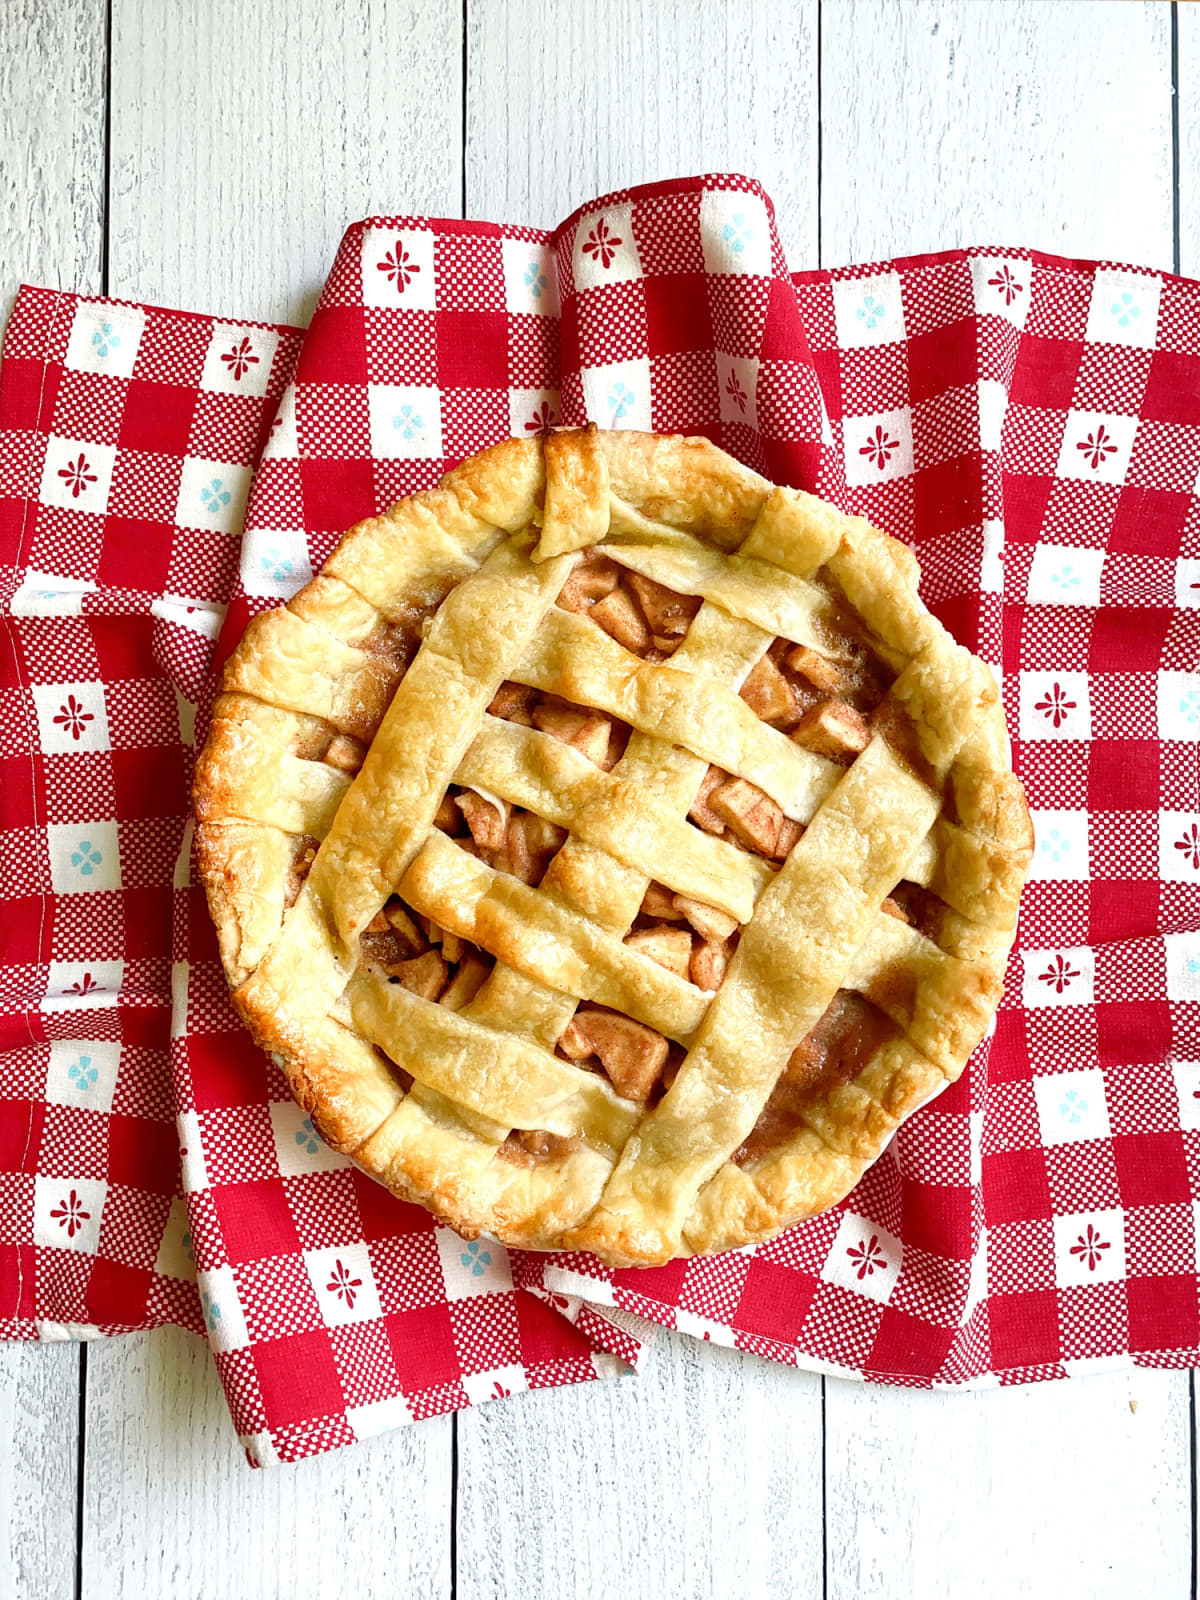 Apple pie with lattice crust on checkered tablecloth